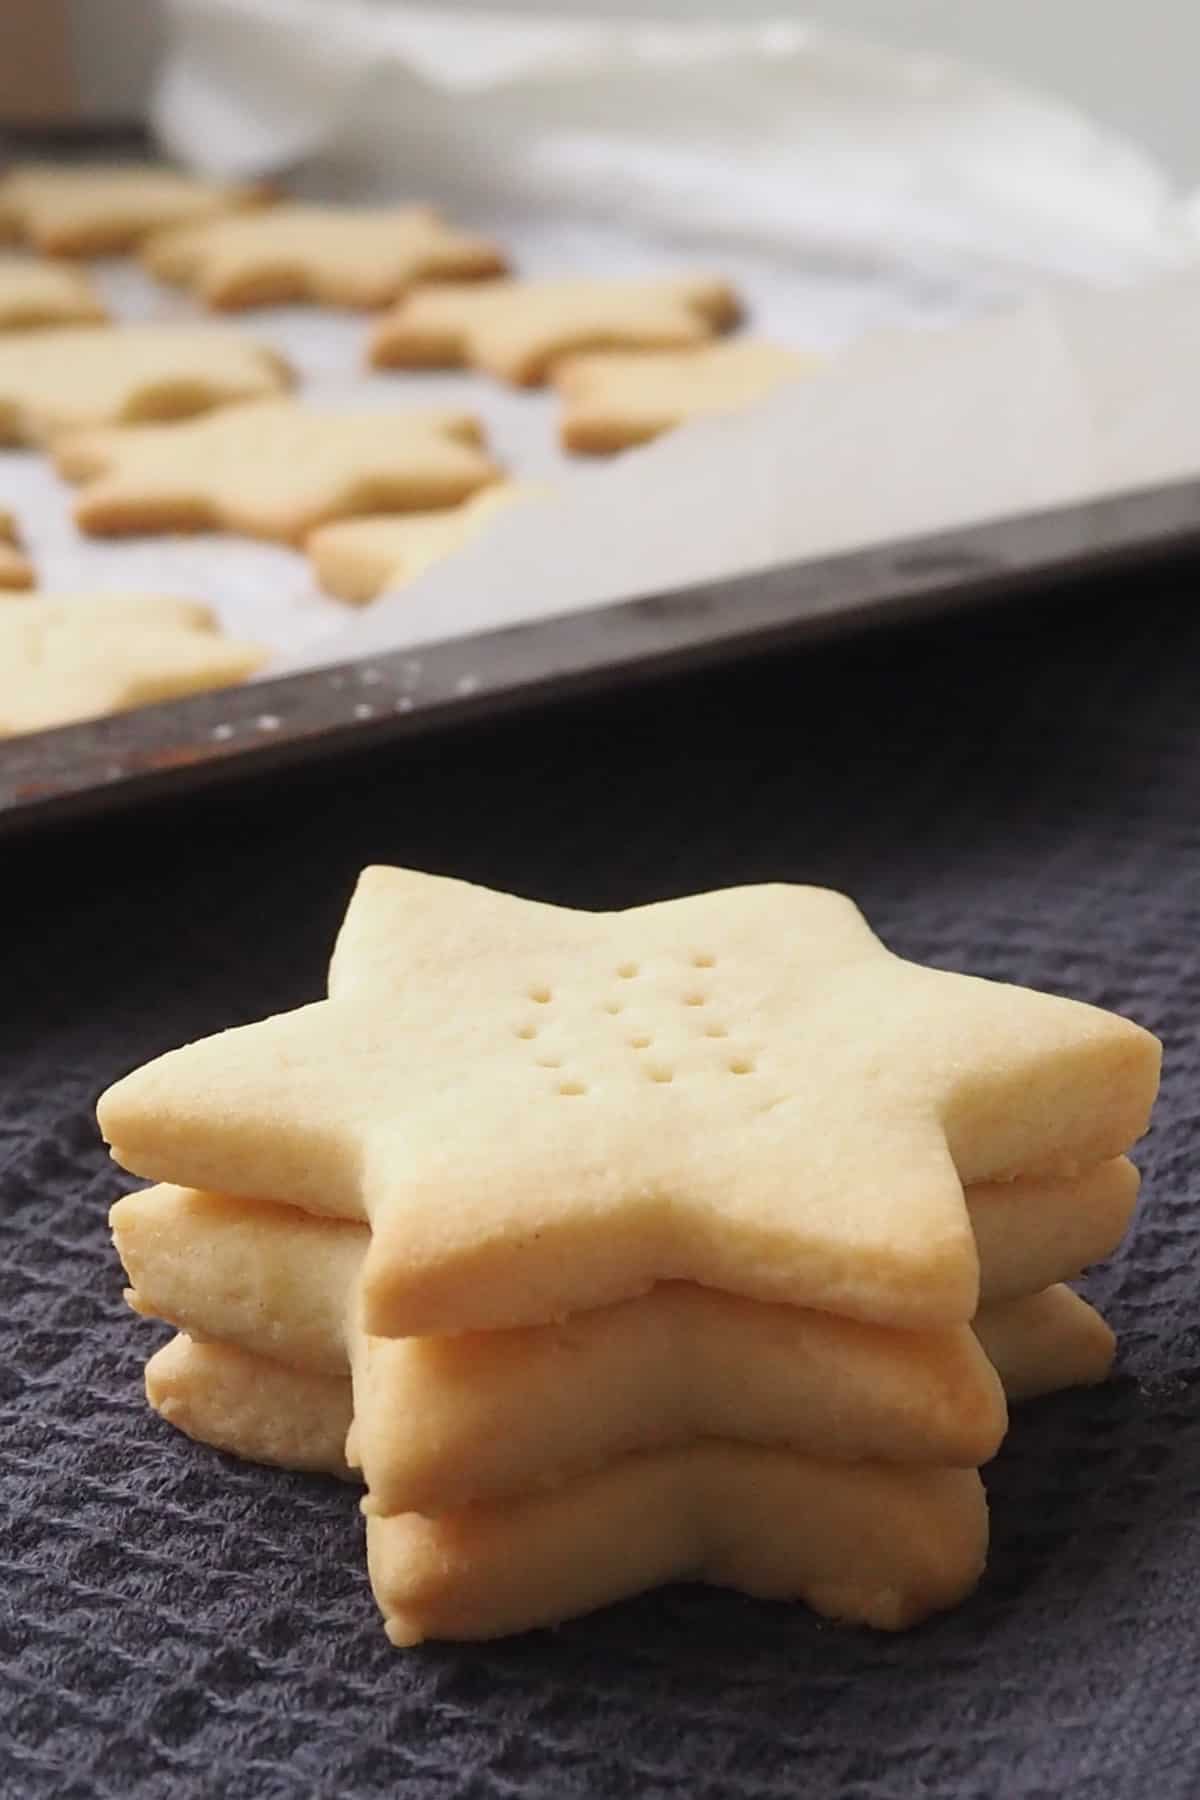 Three Shortbread Stars sitting on black towel with a tray of 3 ingredient shortbread behind them.